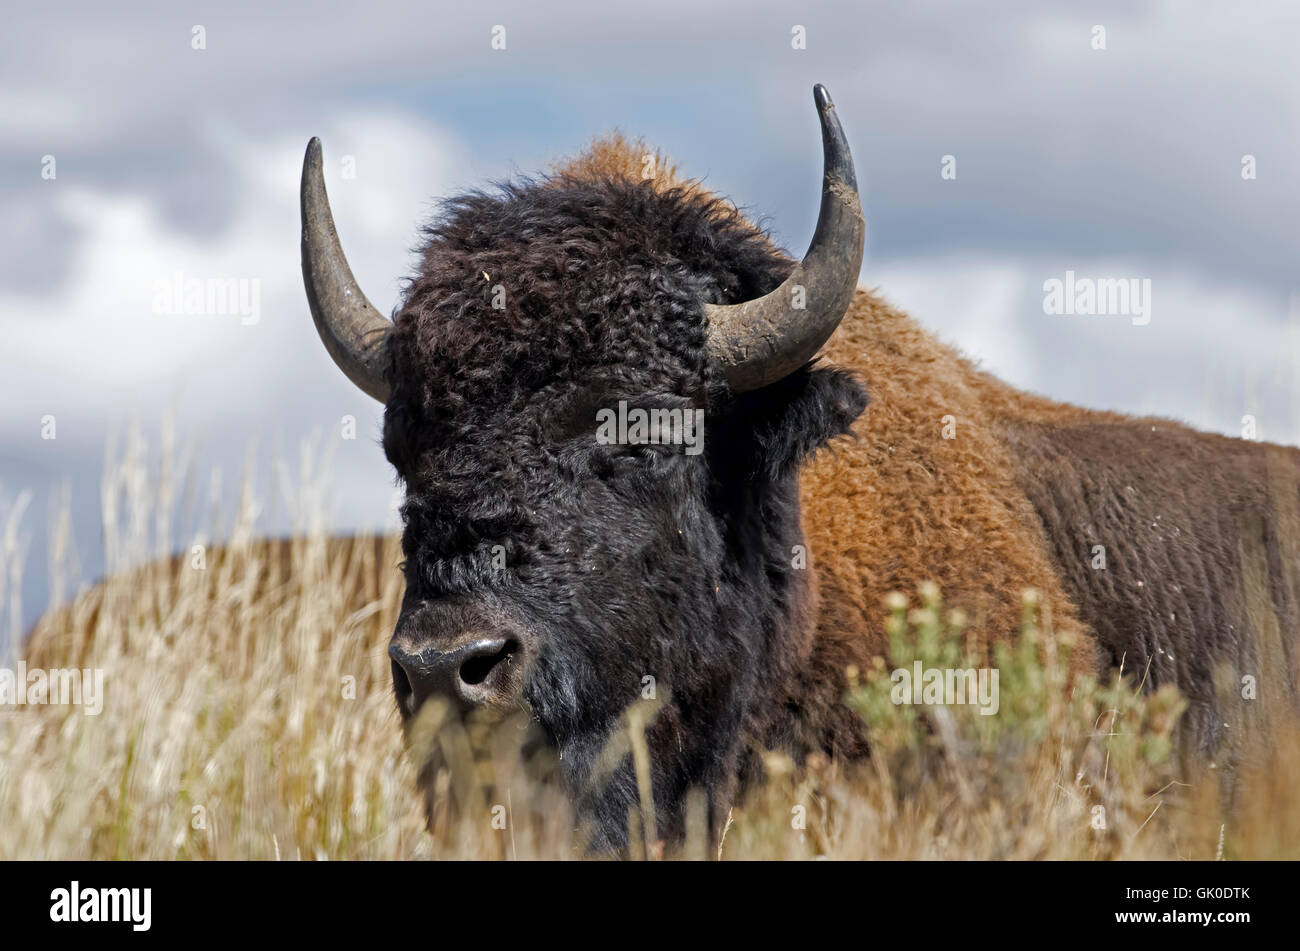 Buffalo in the grass at Yellowstone Park. Bison or buffalo are large, even-toed ungulates. Stock Photo